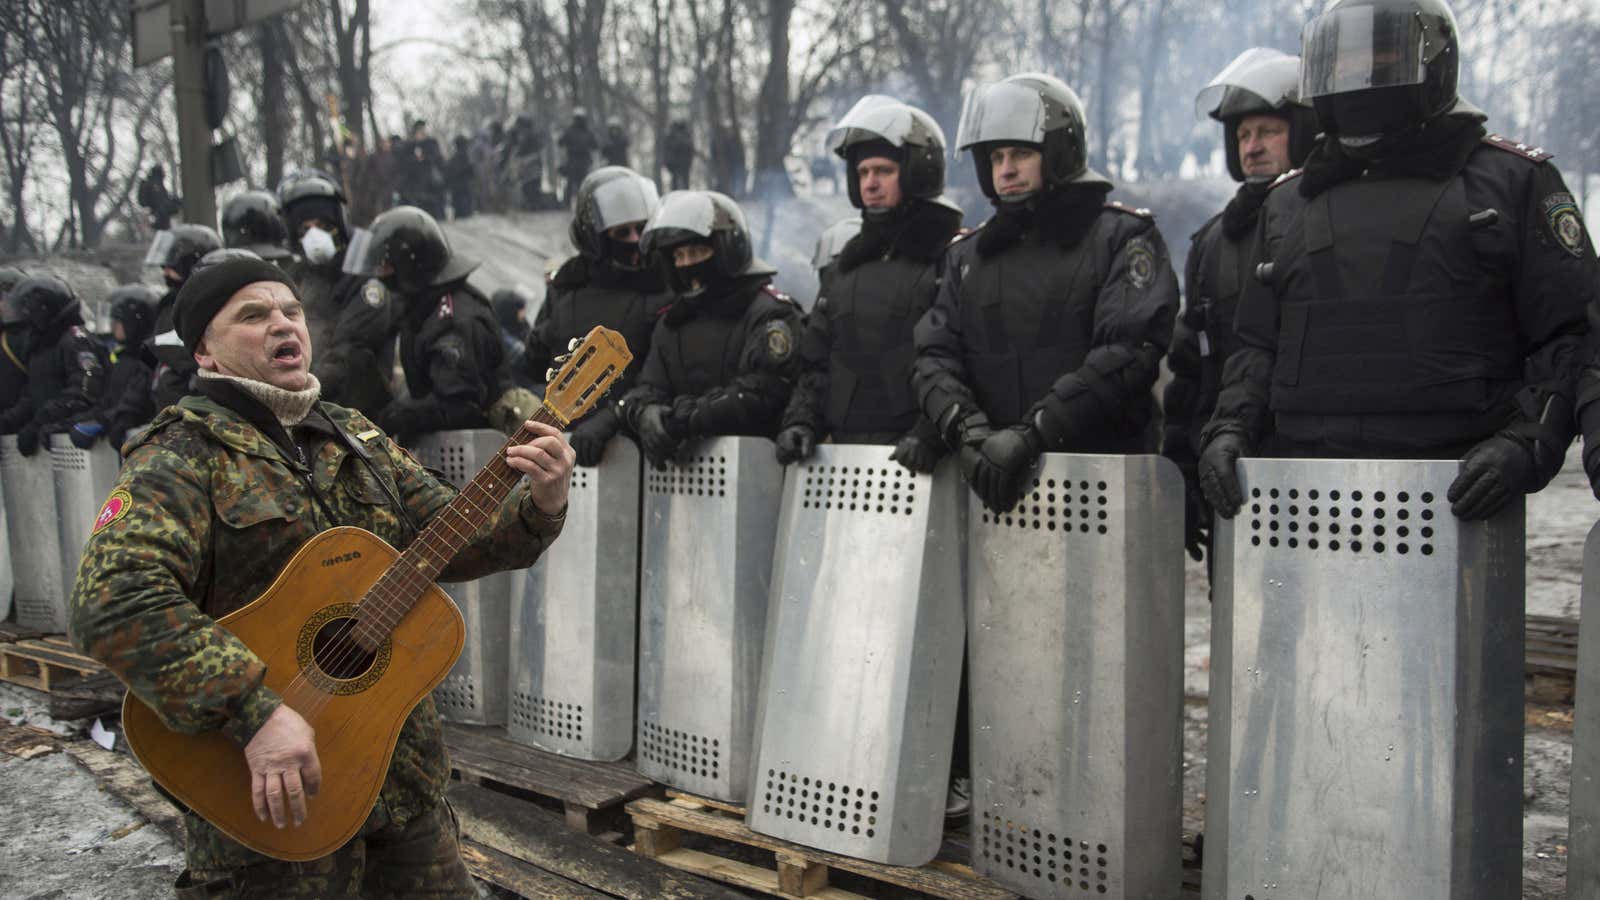 There will now be a musical interlude while Ukraine makes up its mind.